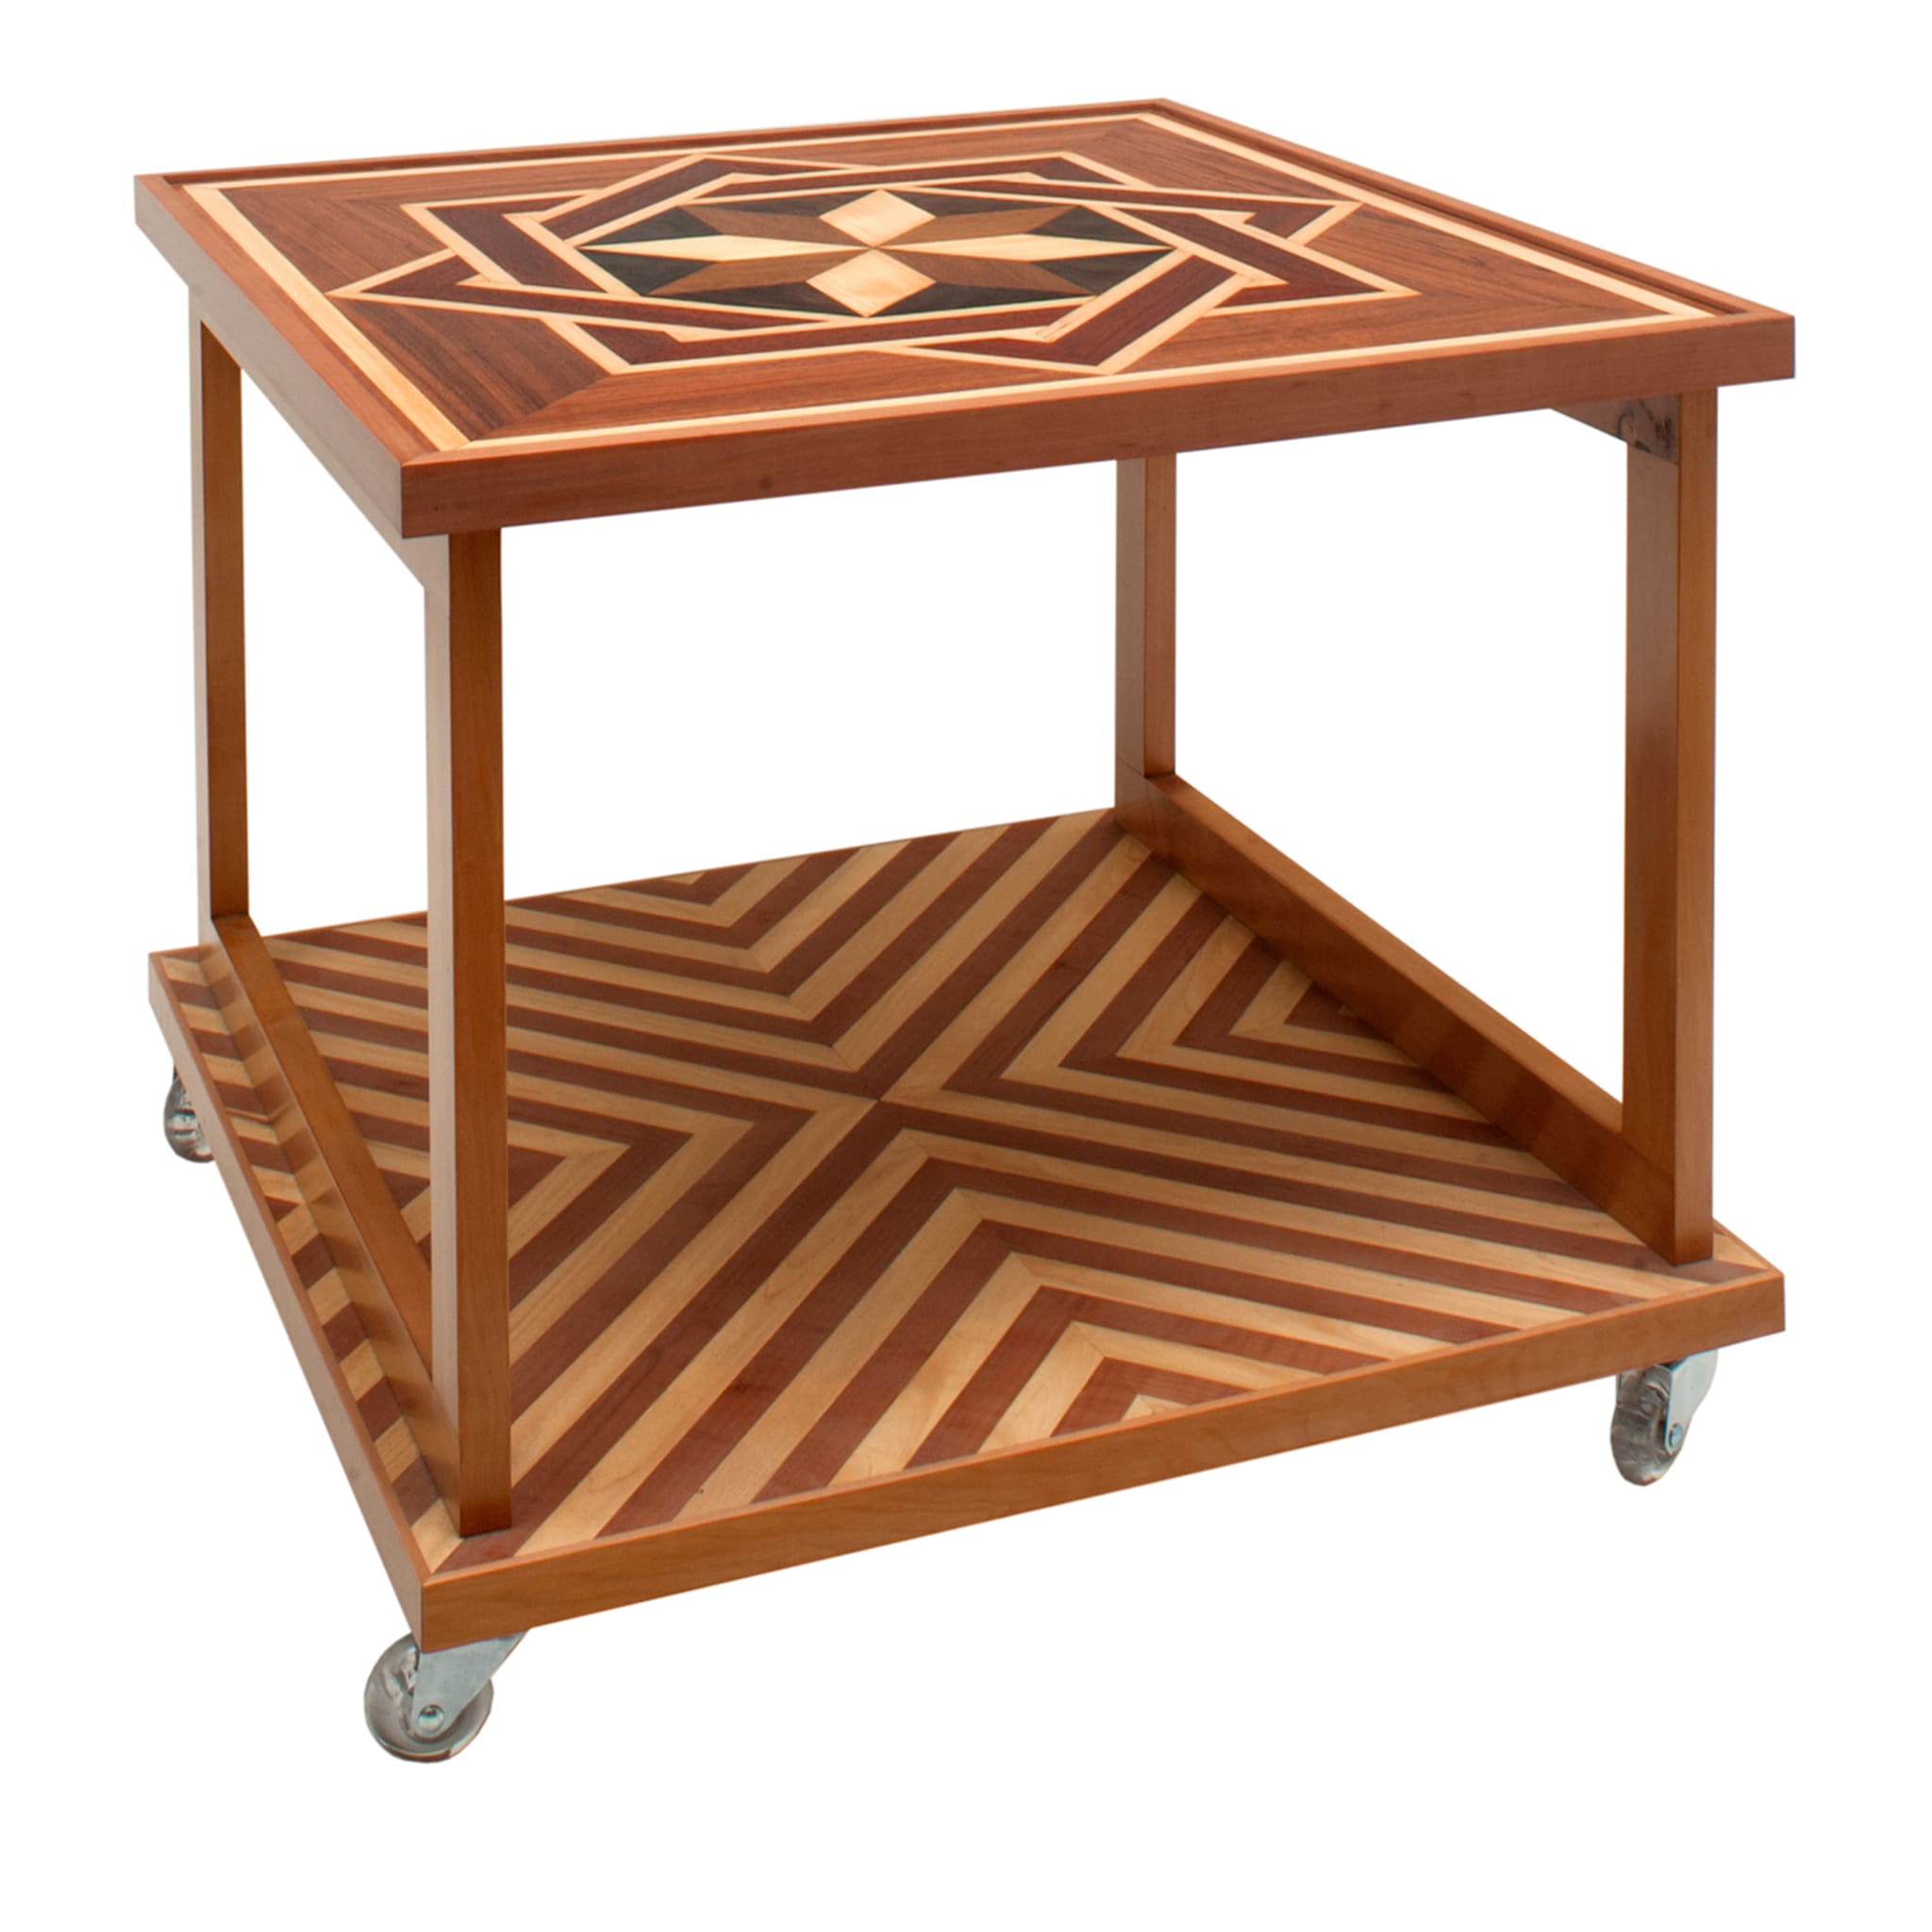 Renaissance-Style Marquetry Wheeled Coffee Table #2 - Main view